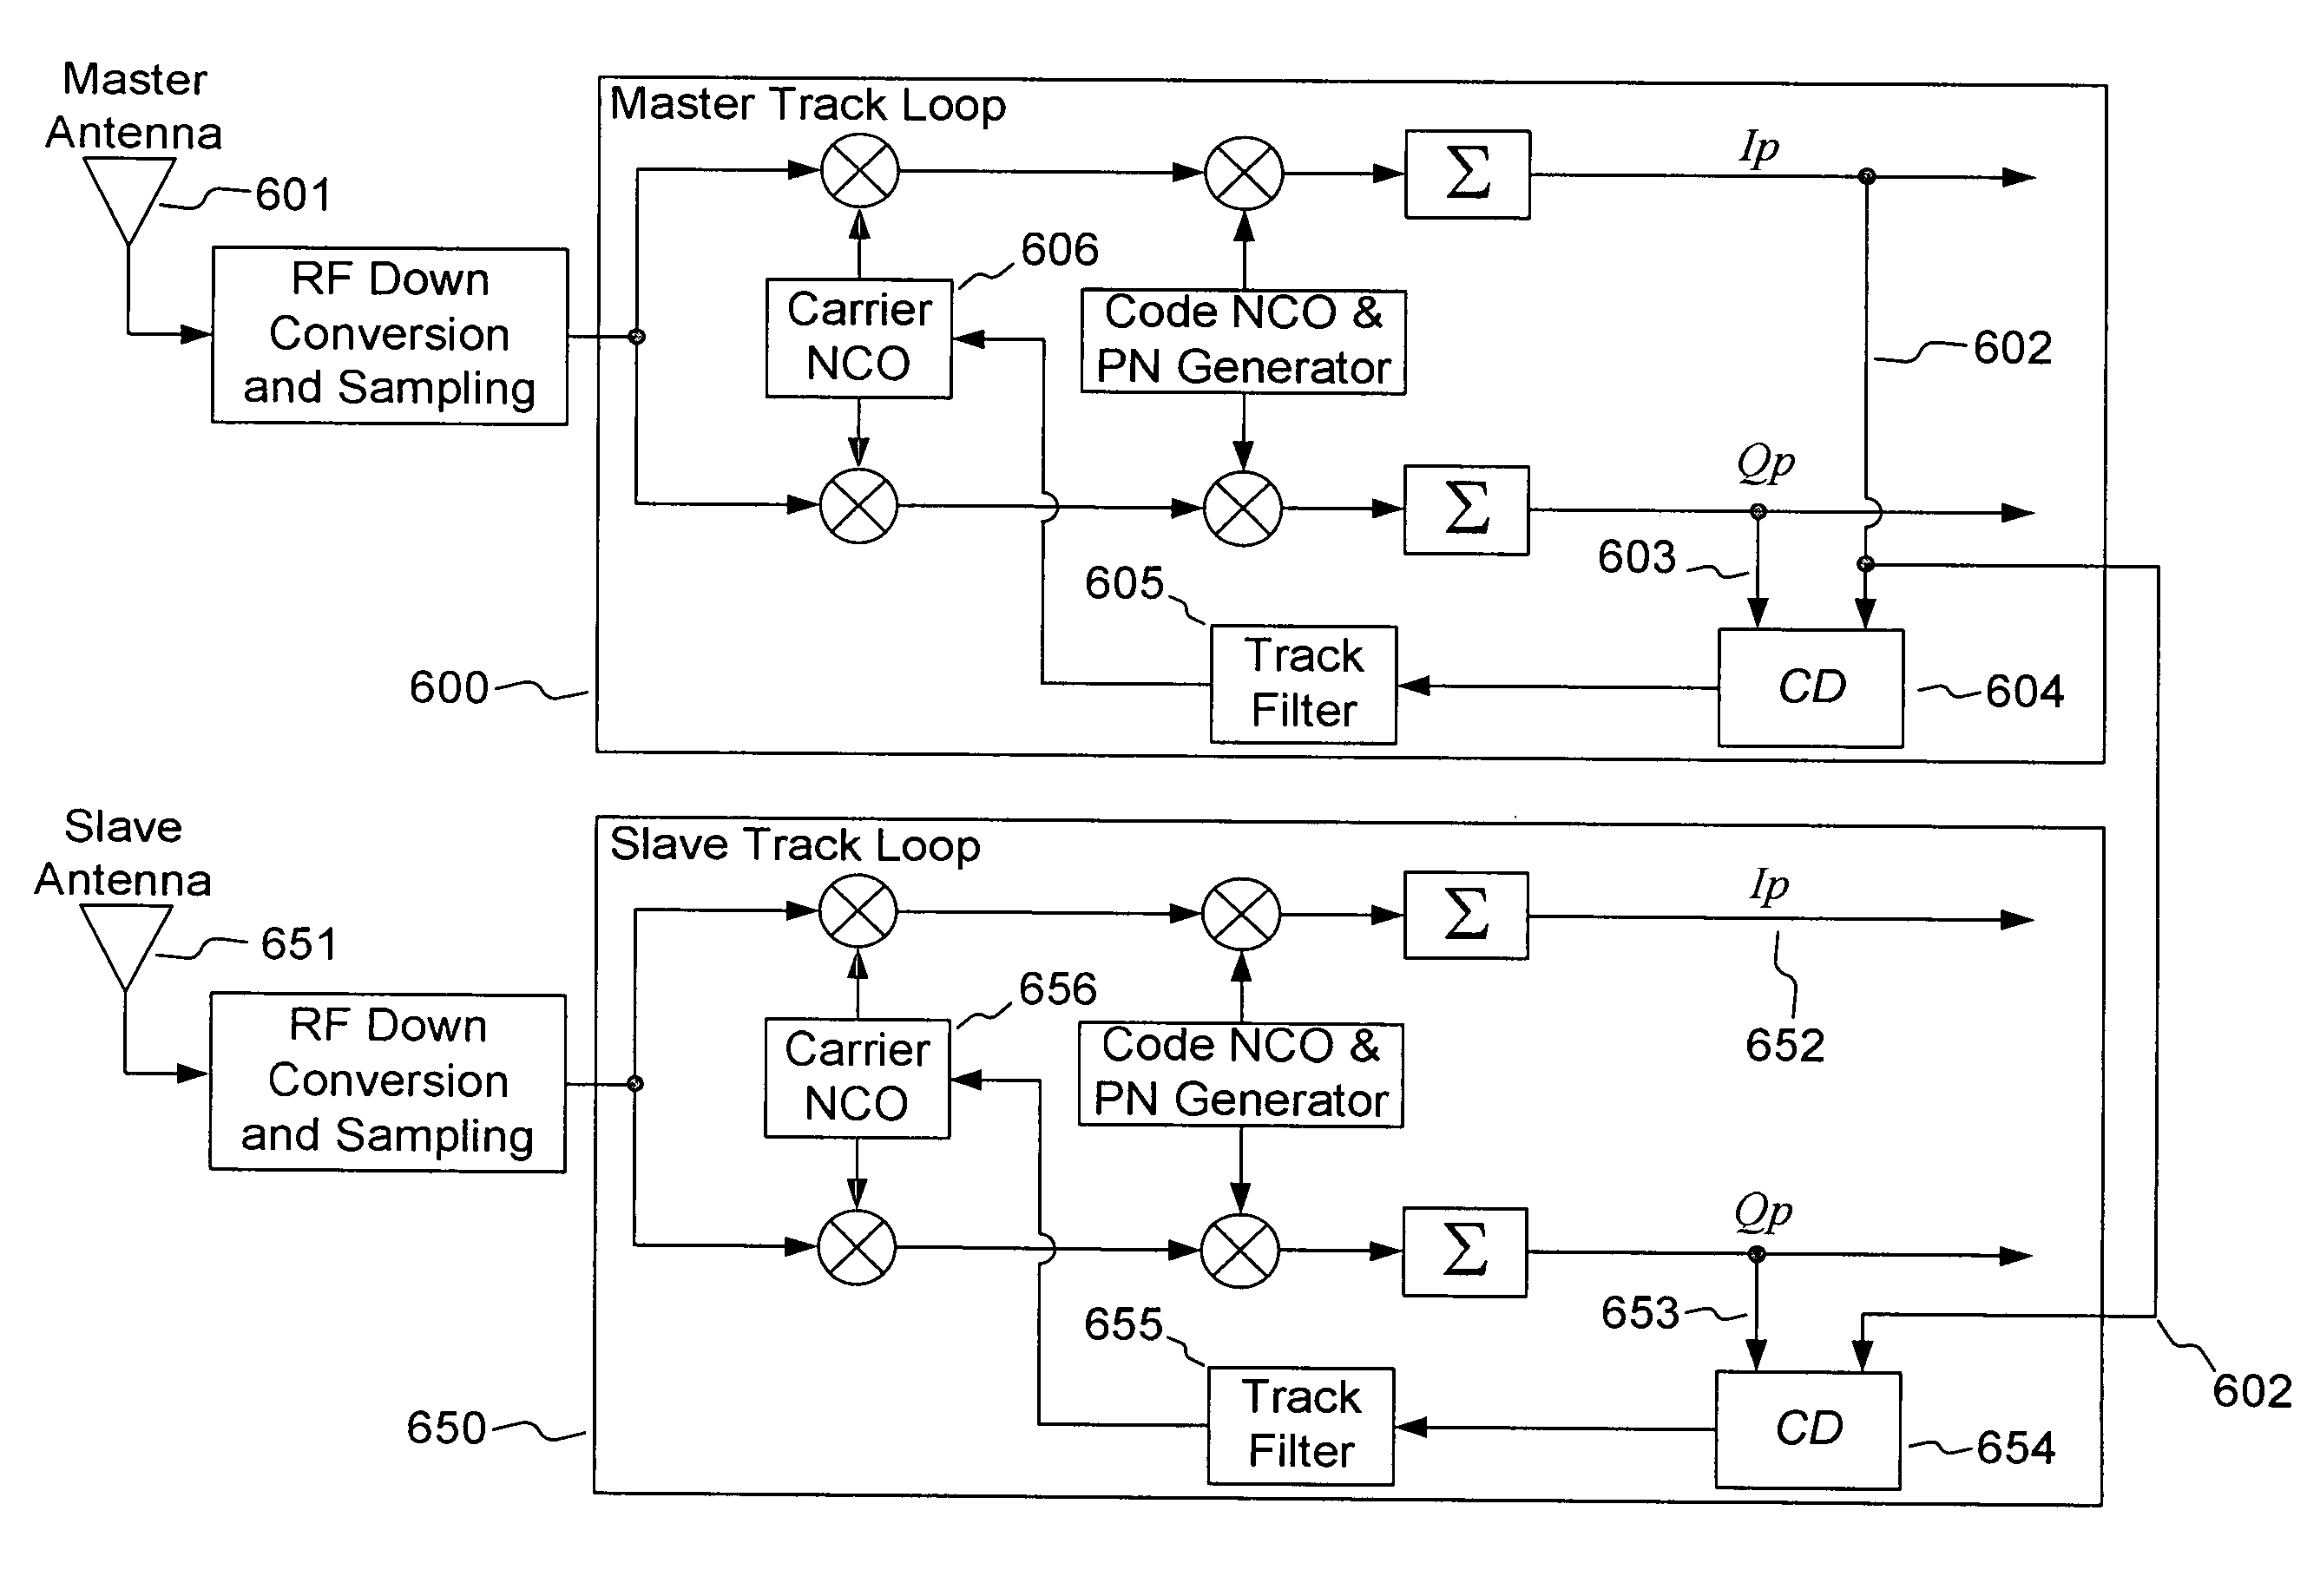 Carrier track loop for GNSS derived attitude